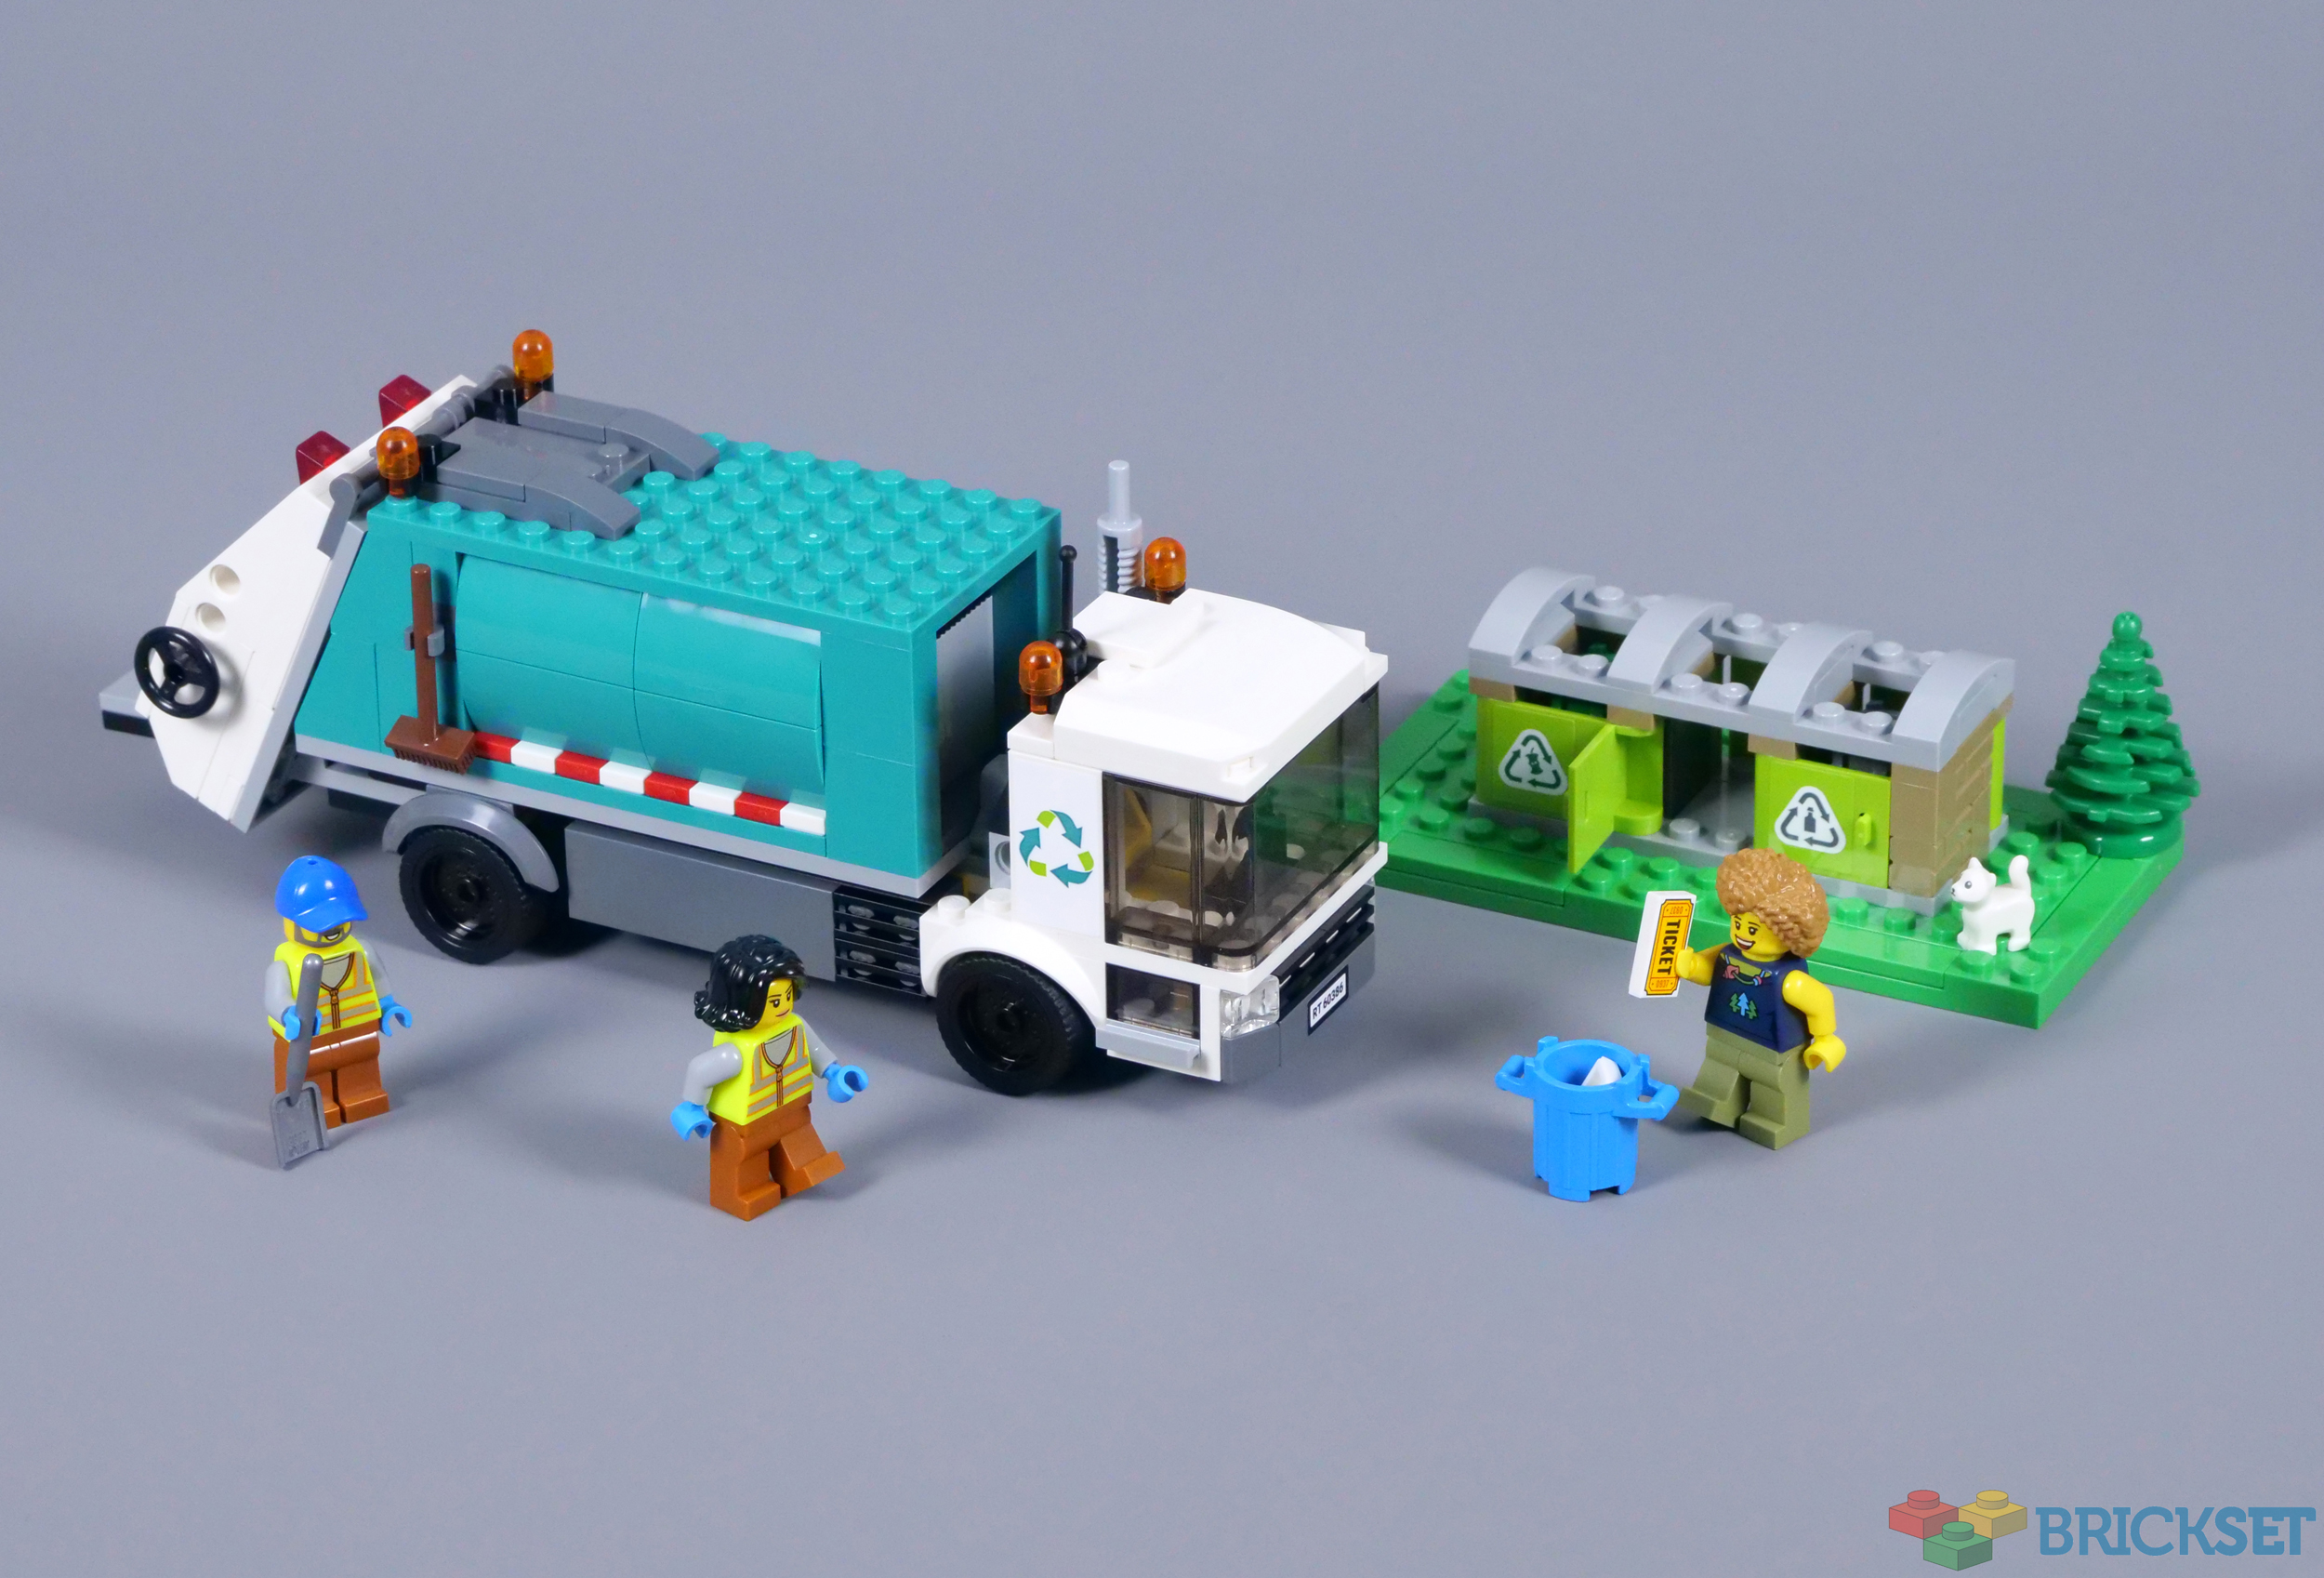 review Truck 60386 Brickset | LEGO Recycling